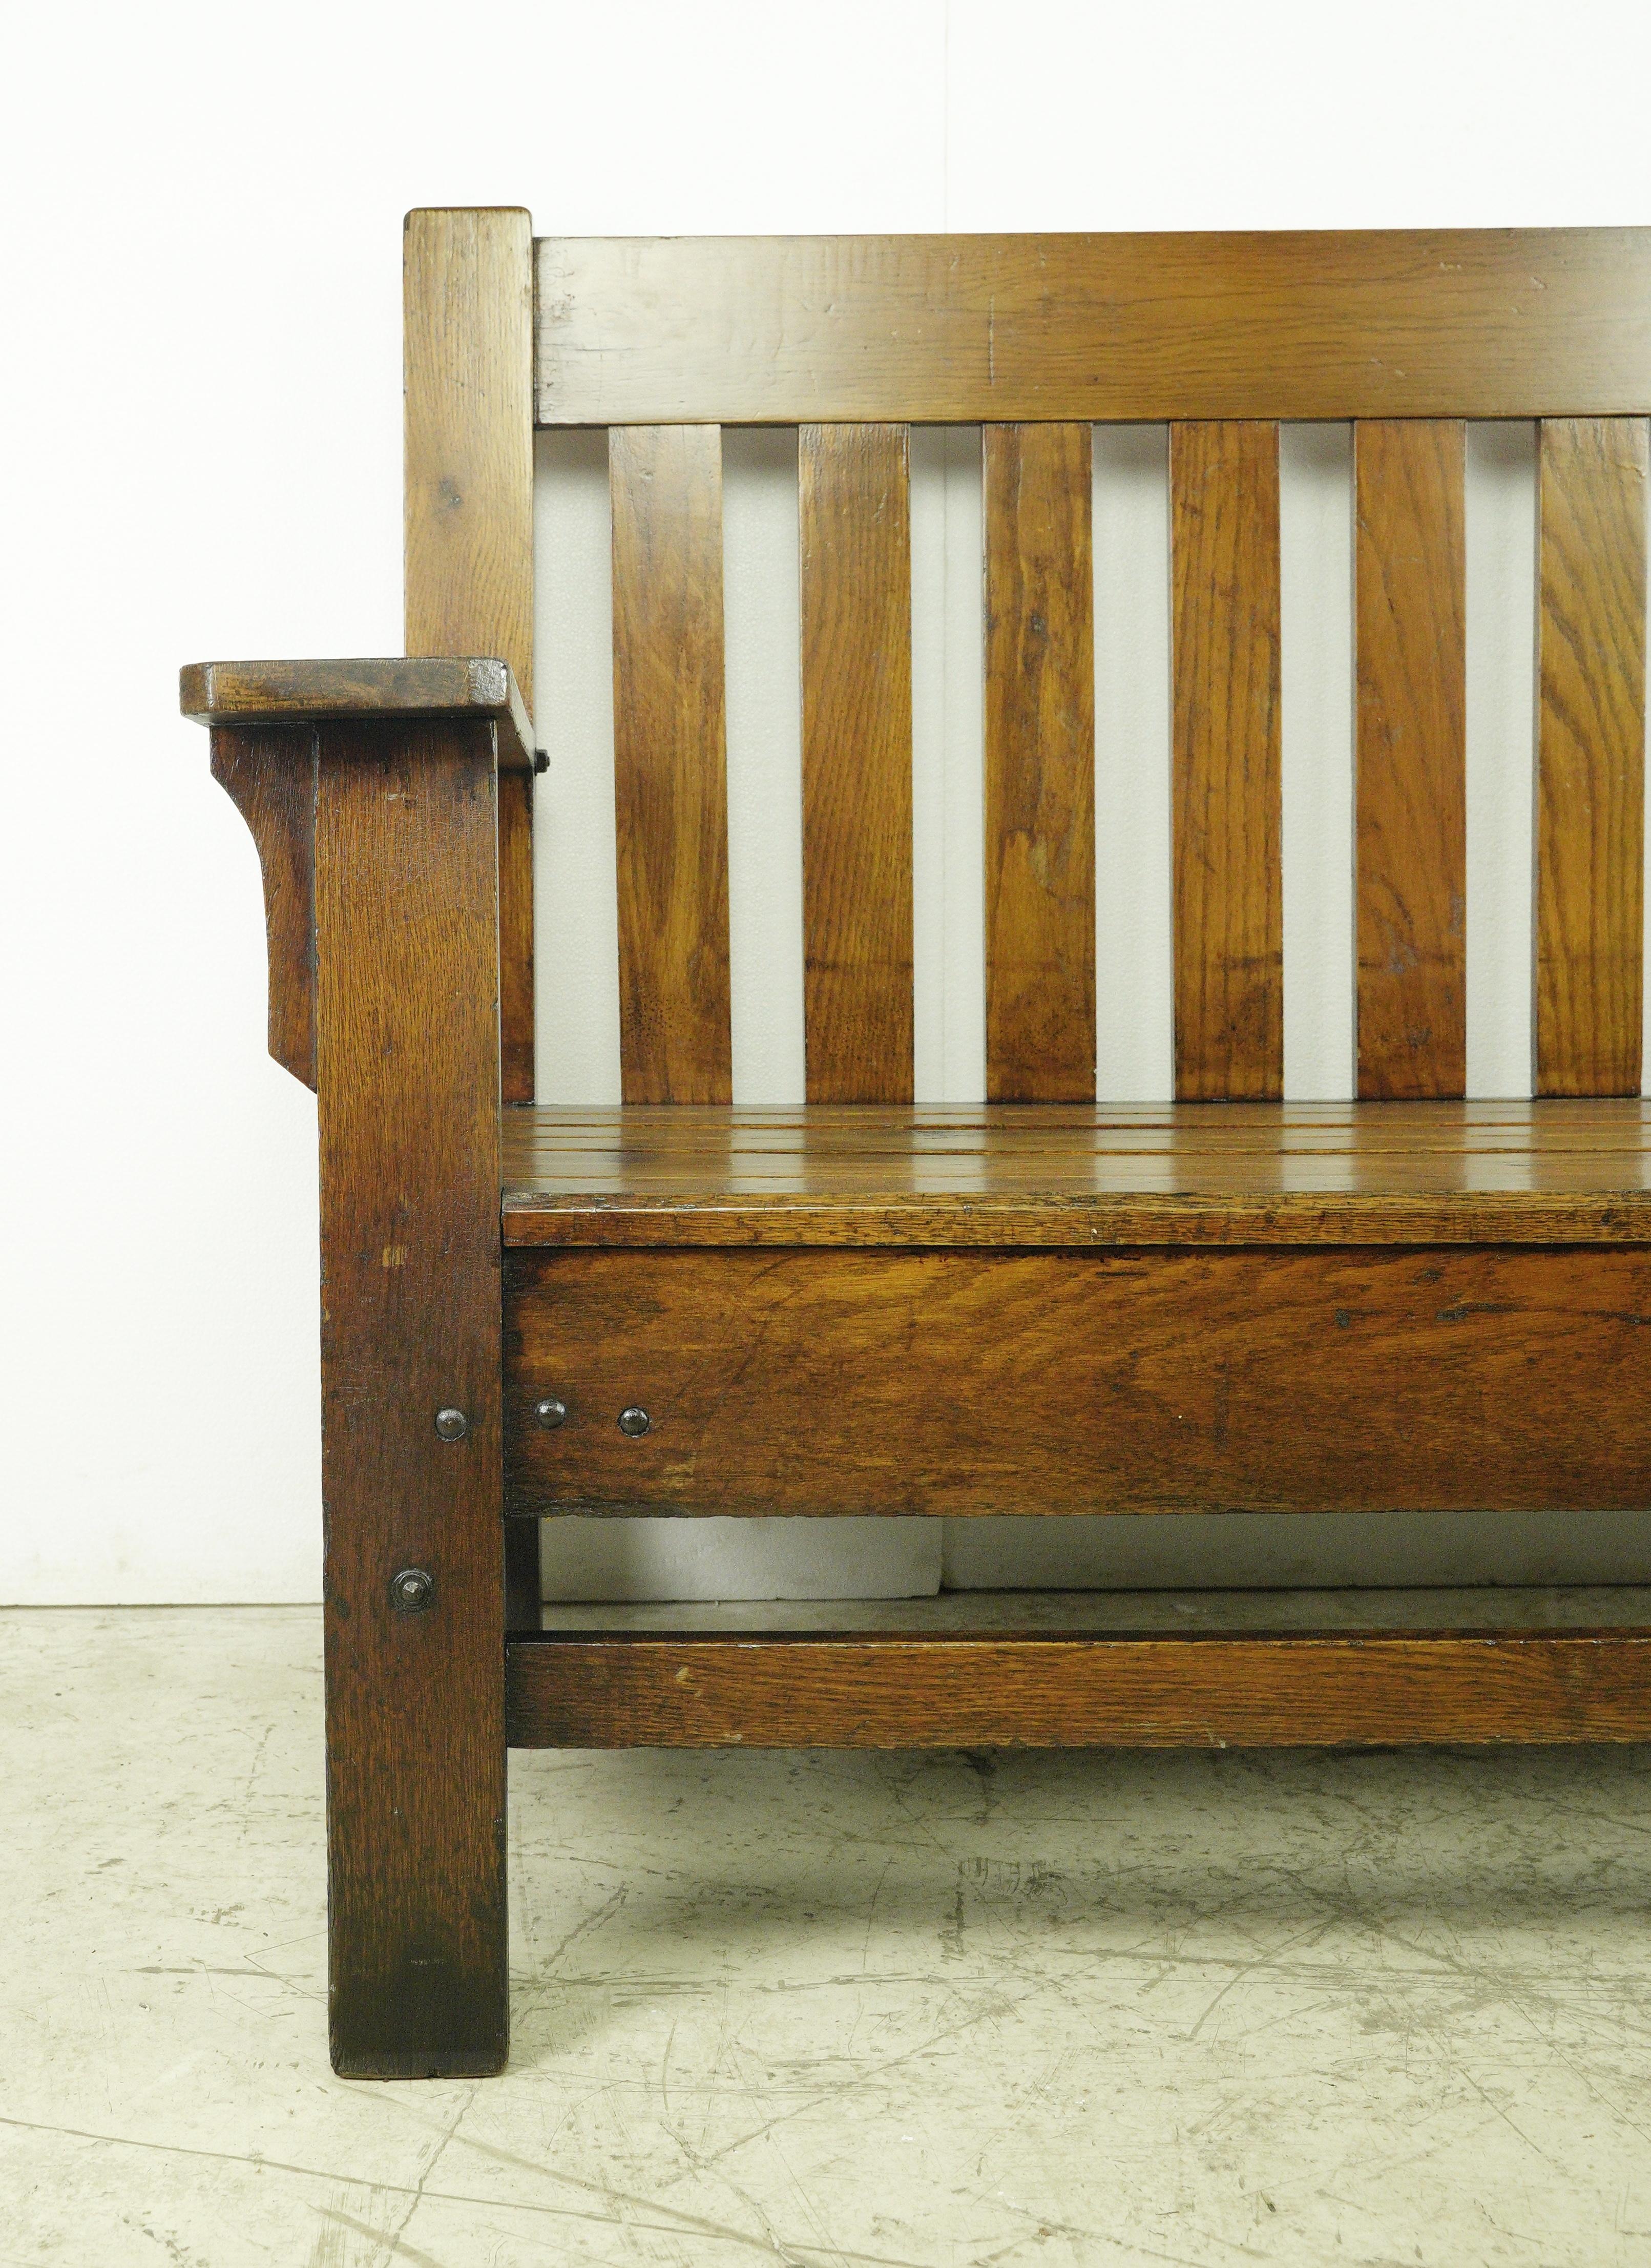 This large bench, crafted in the Mission style, exudes sturdiness and timeless appeal. Ideal for a restaurant waiting area or expansive home seating, its substantial size makes a statement. The restoration process preserved much of the original